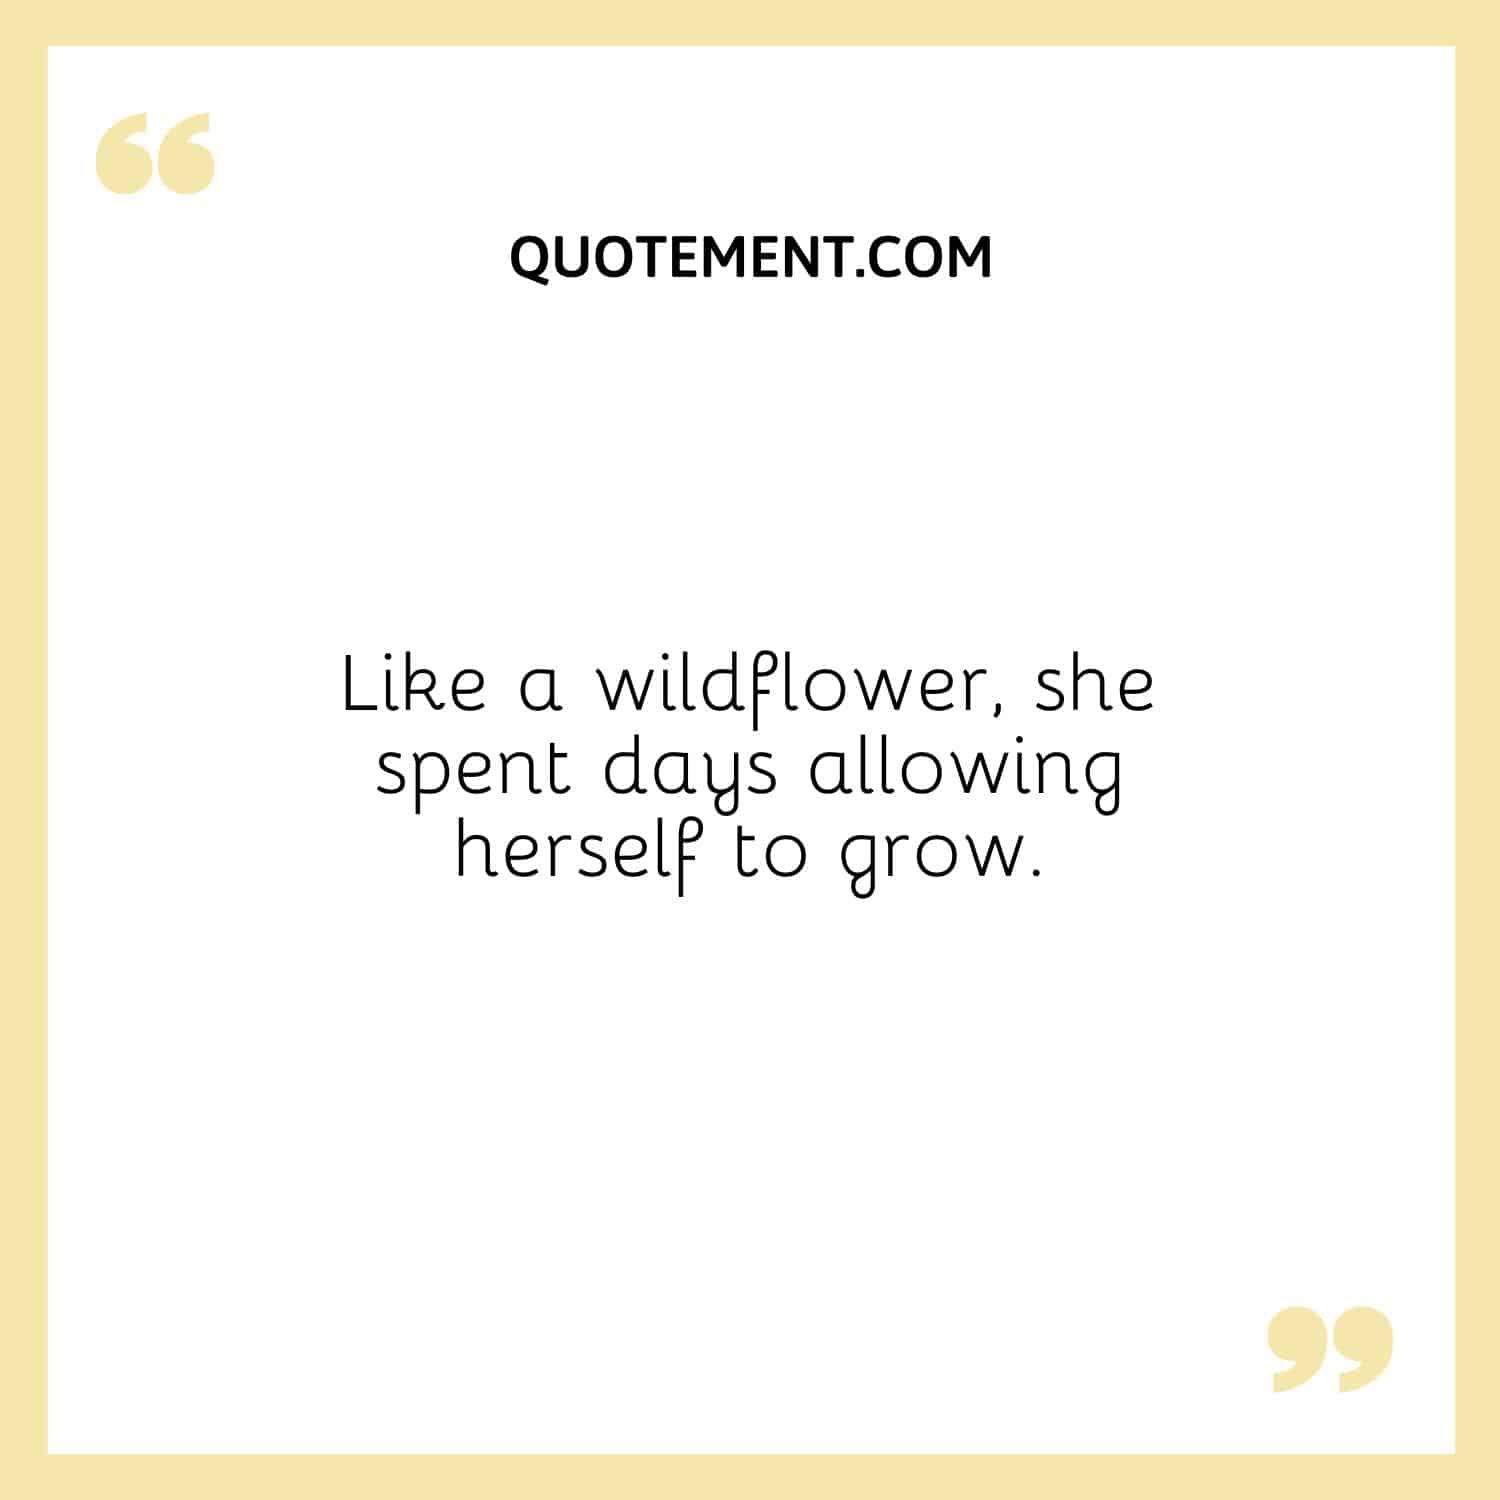 Like a wildflower, she spent days allowing herself to grow